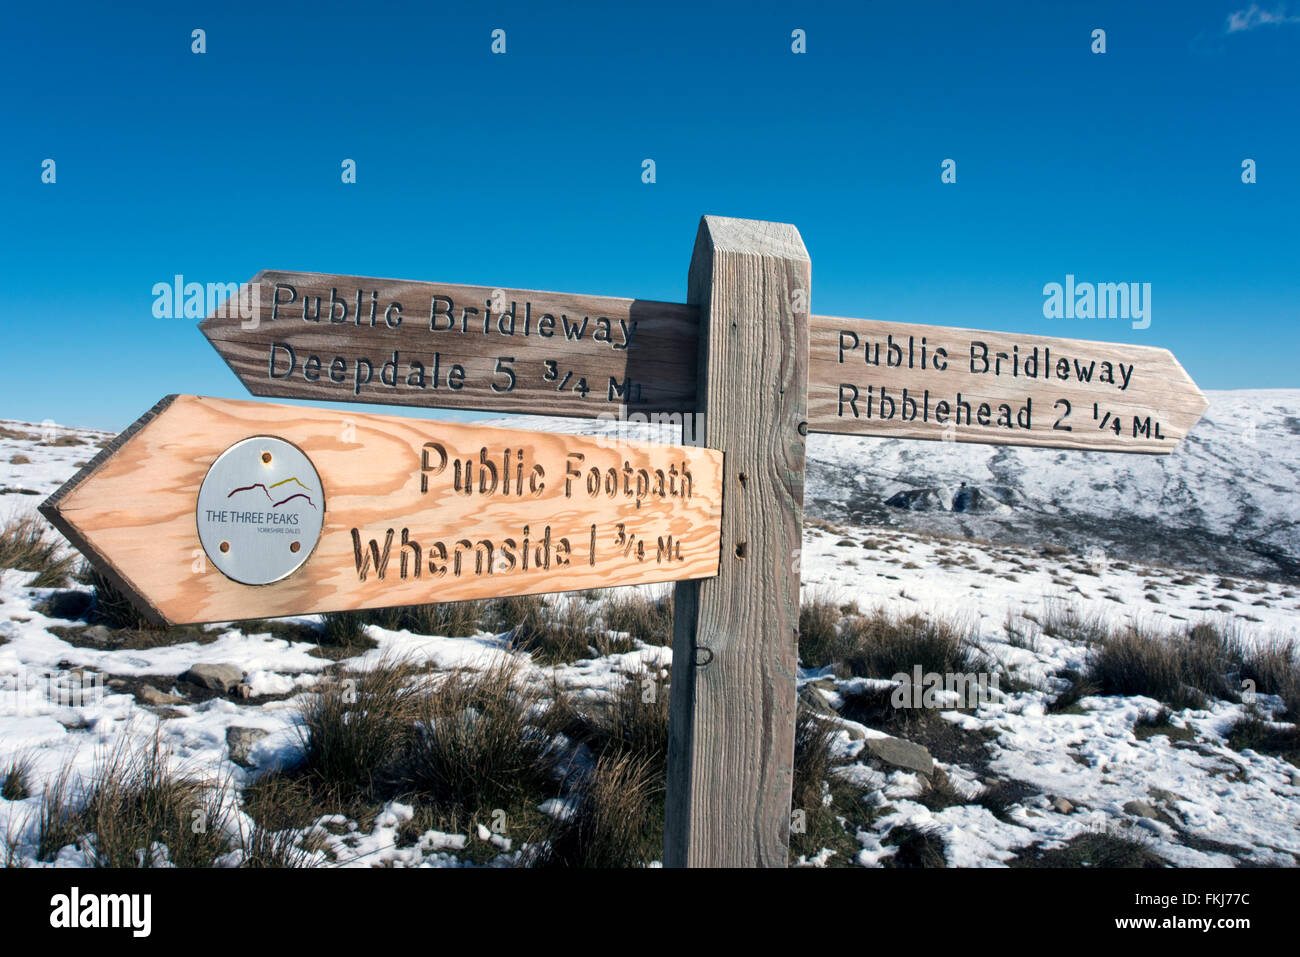 The Three Peaks trail to Whernside summit, Ribblesdale, North Yorkshire, UK Stock Photo